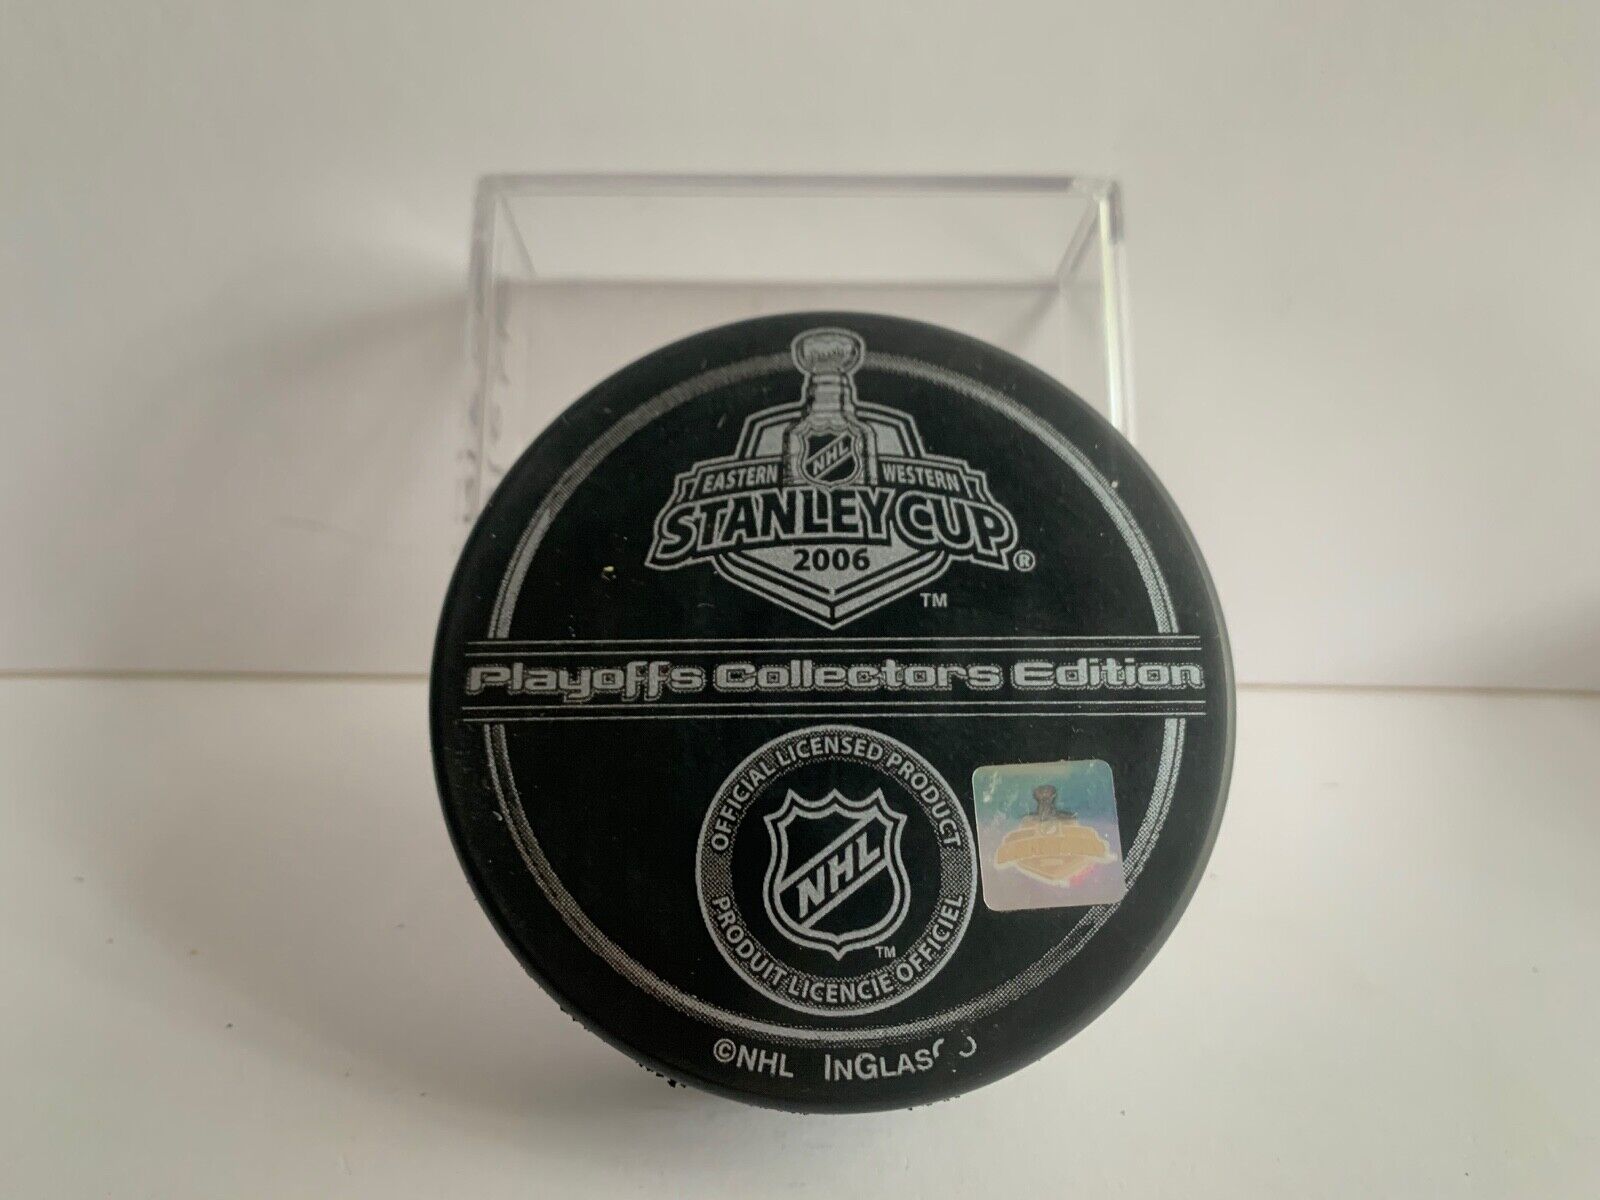 Peter Laviolette Autographed Official Hockey Puck 2006 Stanley Cup Champs Puck